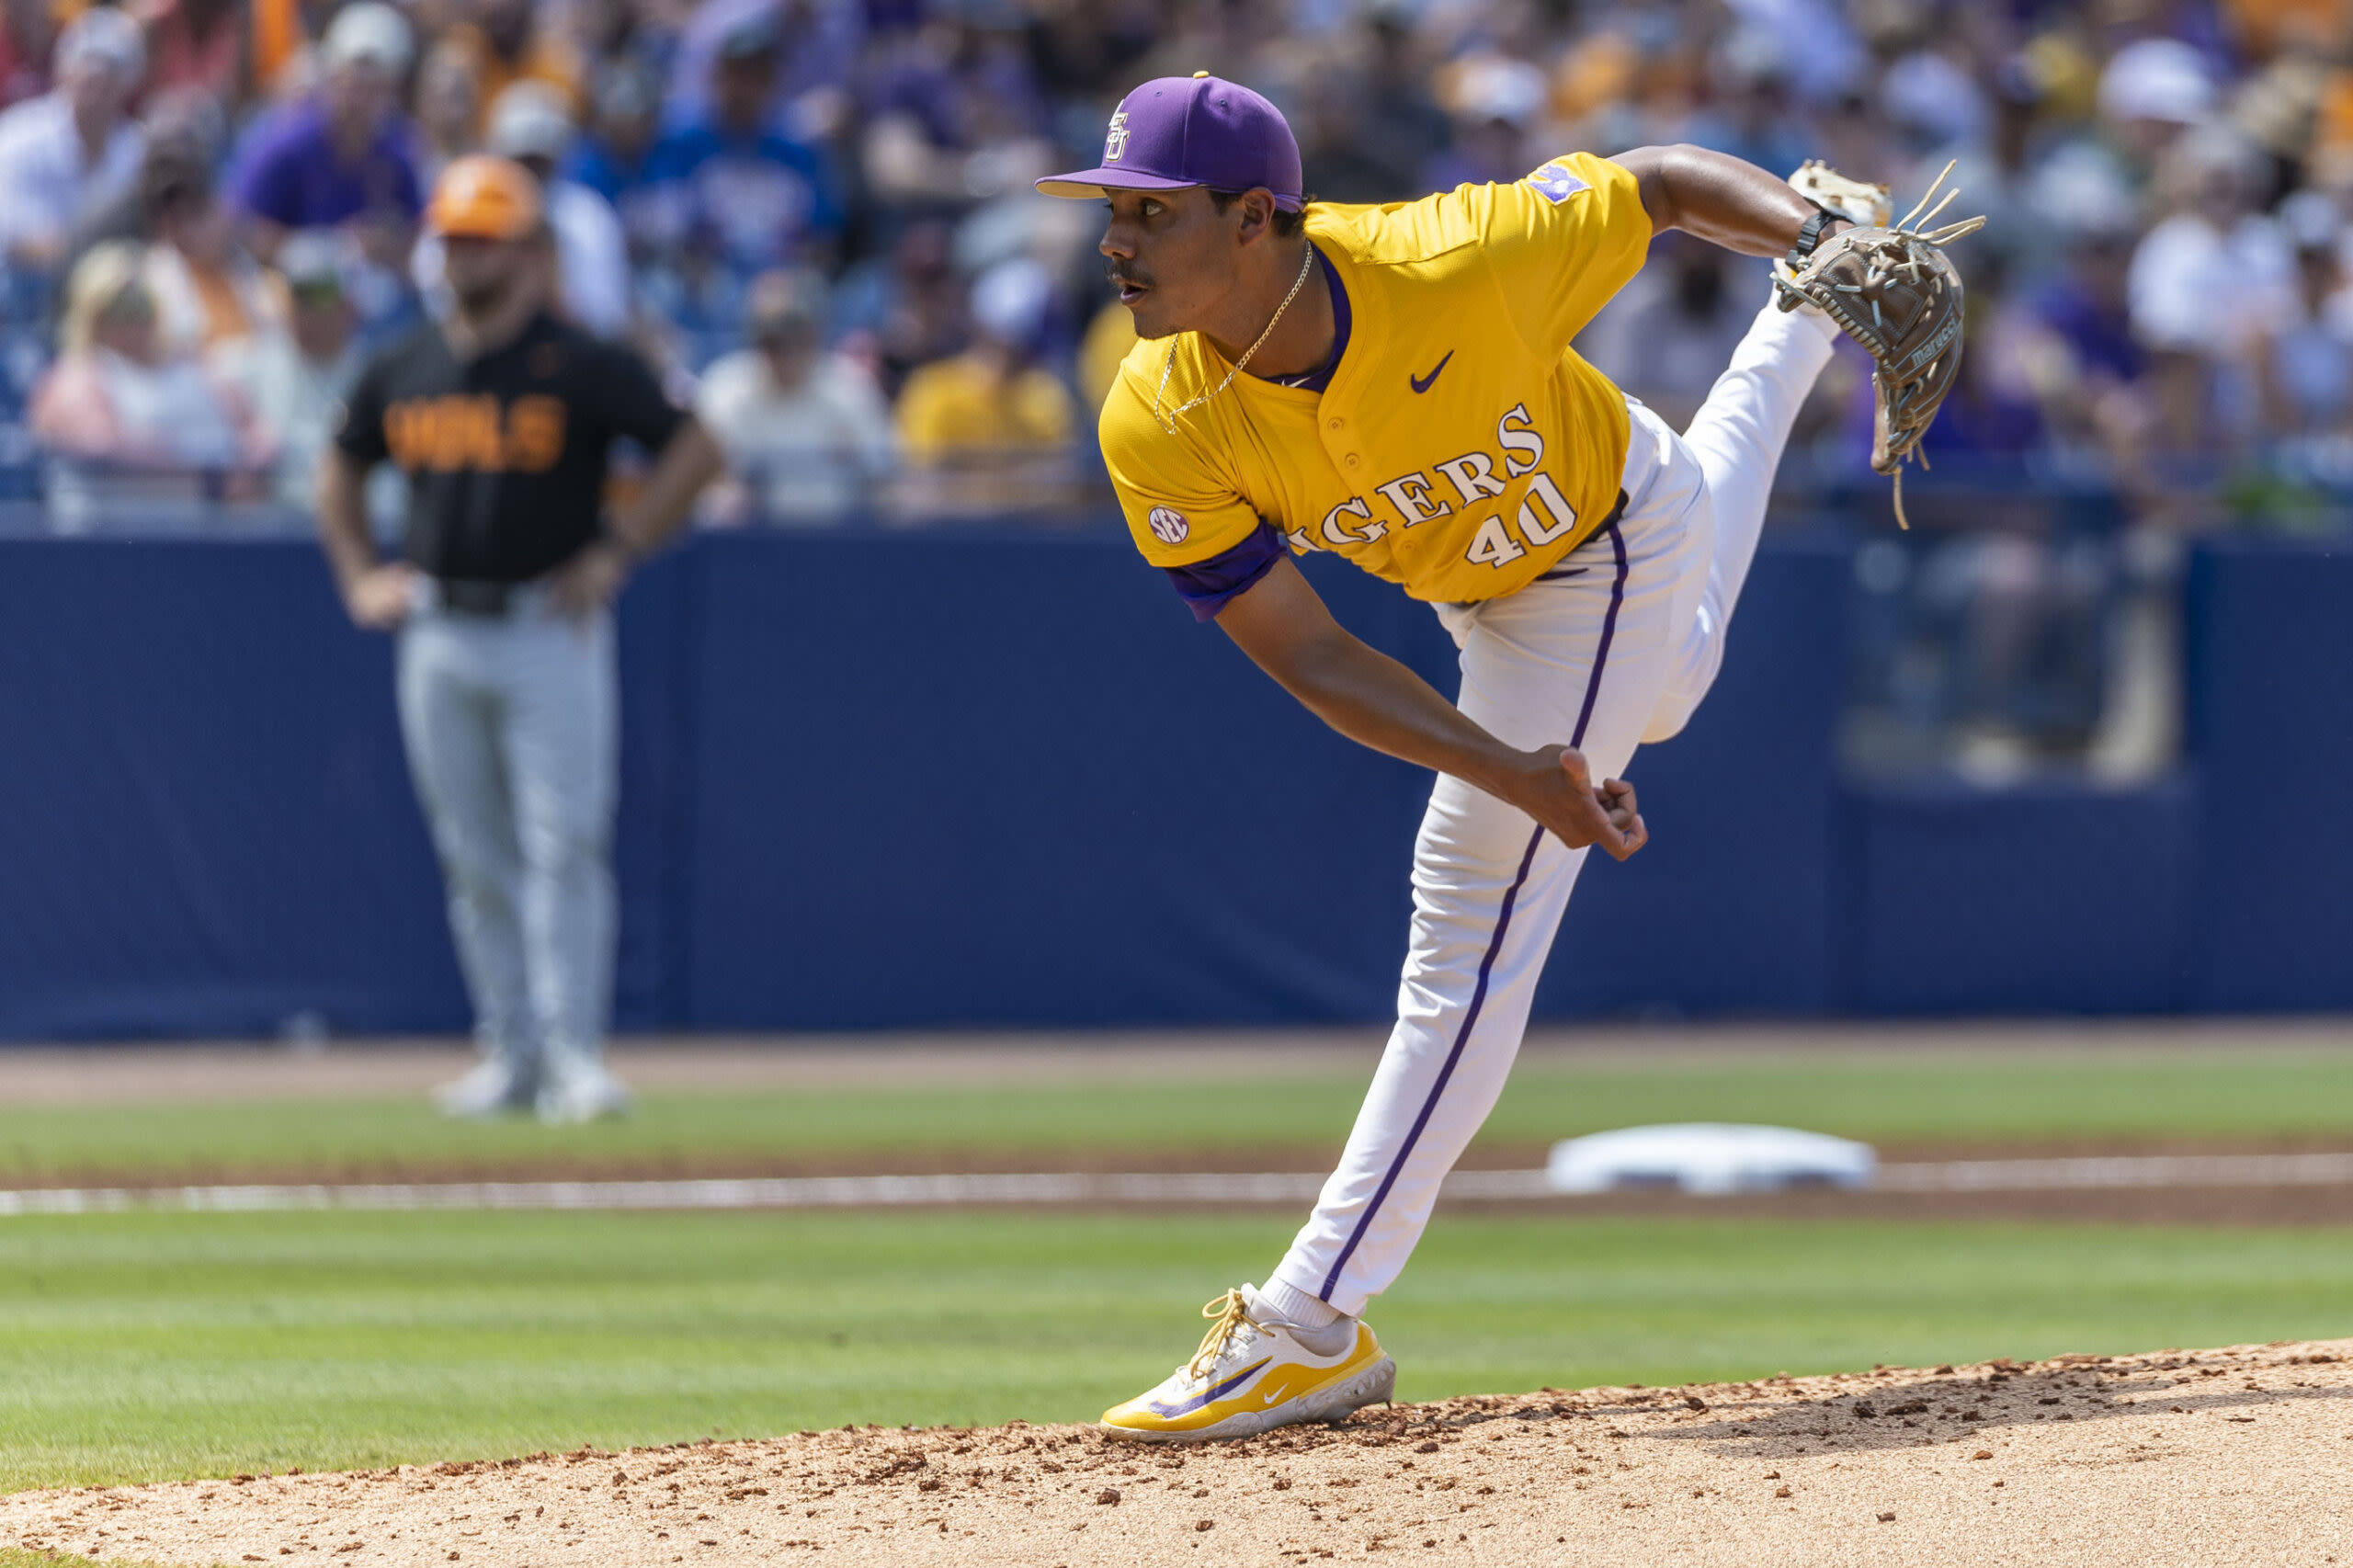 On3 makes its prediction as LSU baseball heads to Chapel Hill Regional